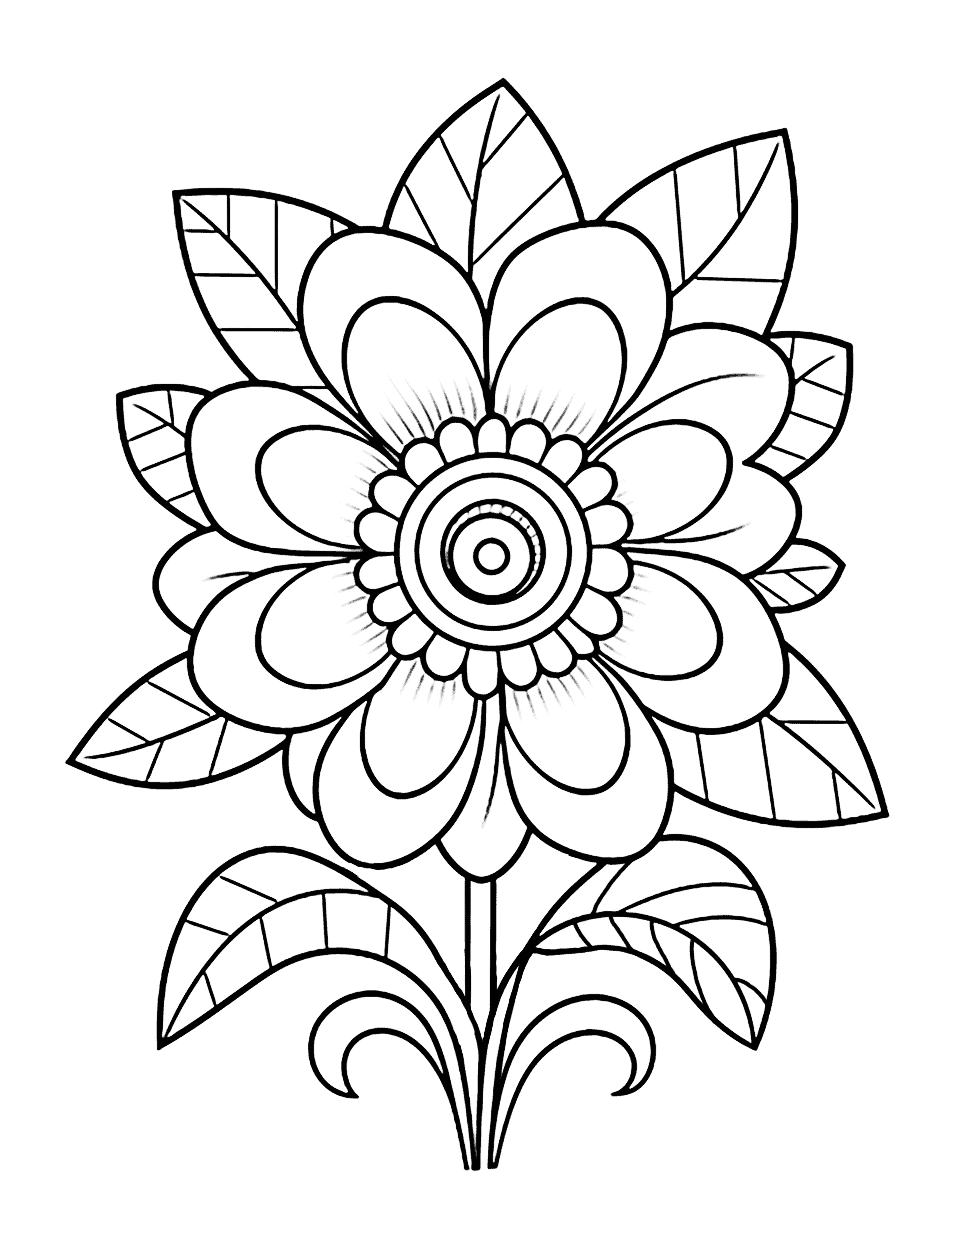 Stress Relief Floral Mandala Flower Coloring Page - A complex floral mandala designed for stress relief.